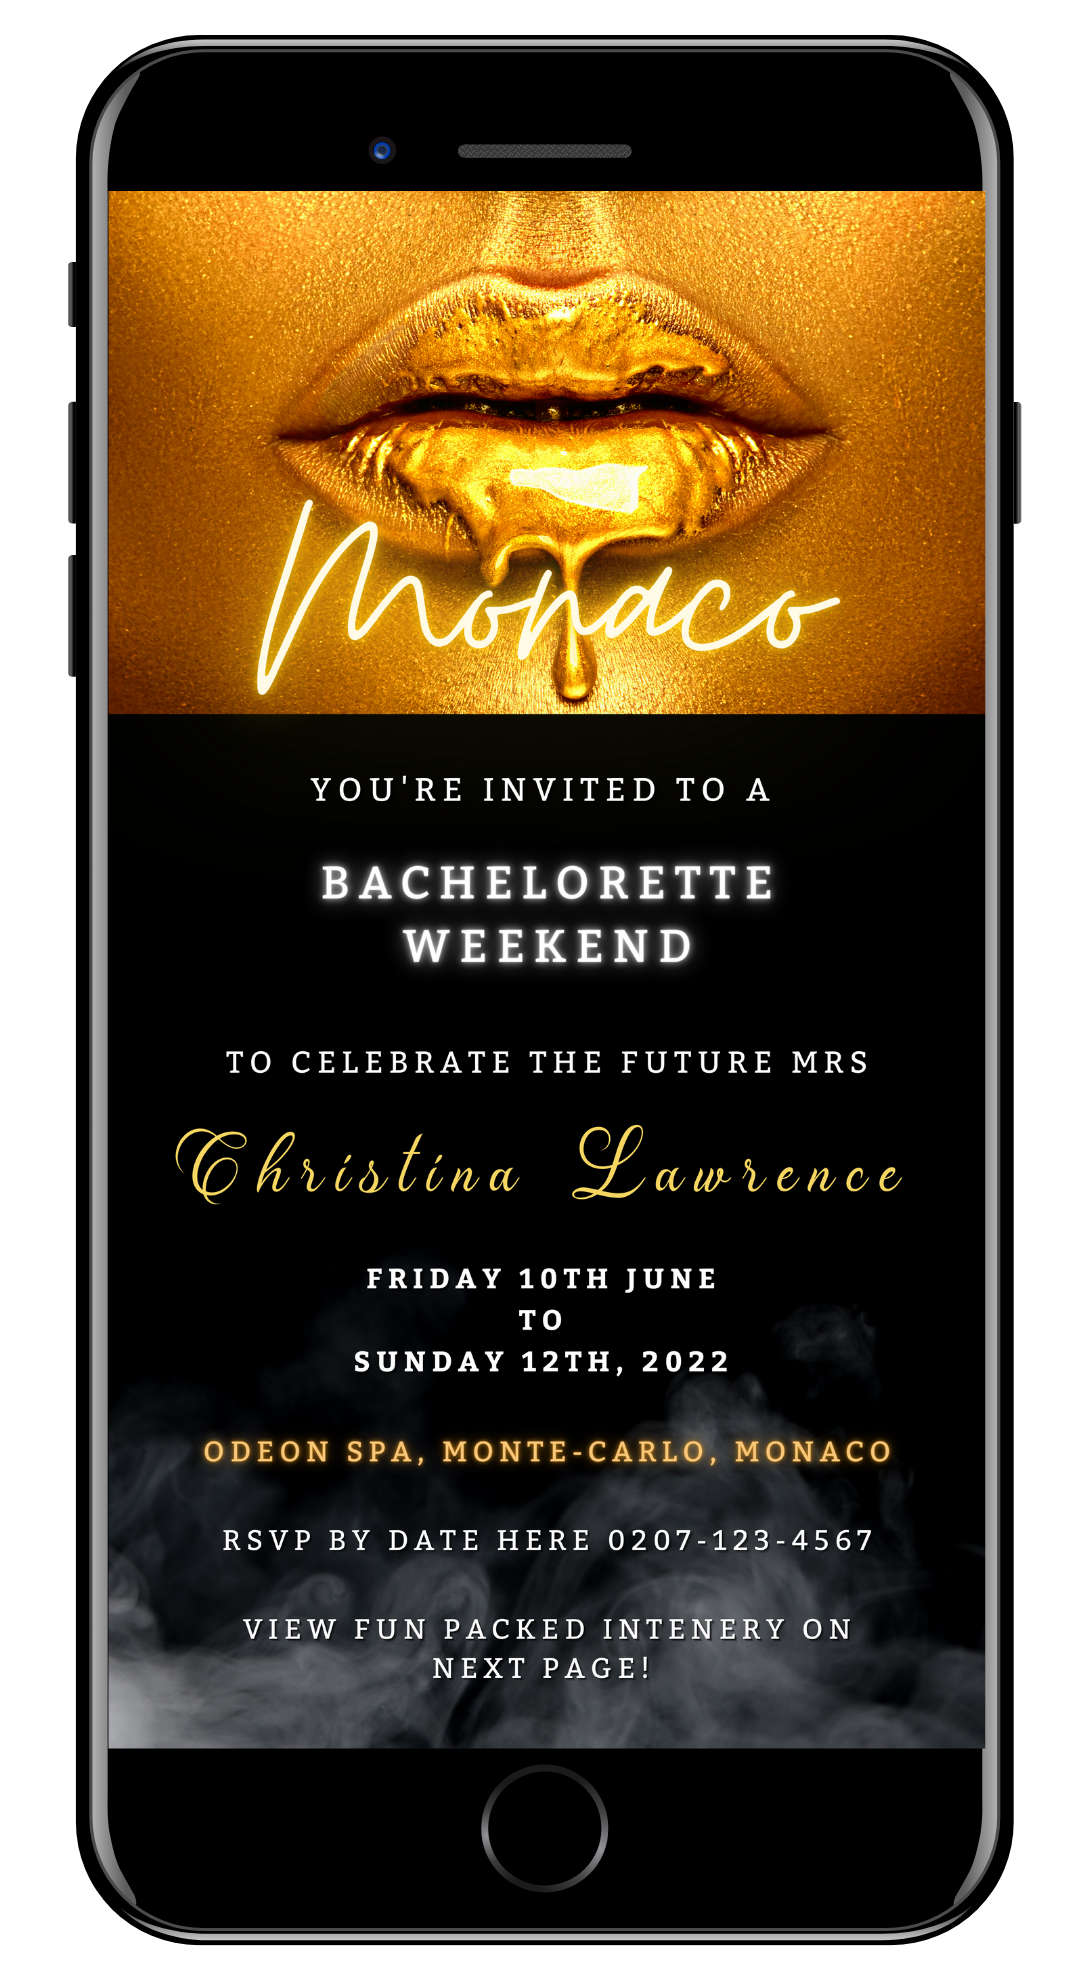 Customizable digital invitation featuring gold lips and elegant black background text for a Bachelorette Weekend Party. Editable via Canva for easy personalization and electronic sharing.